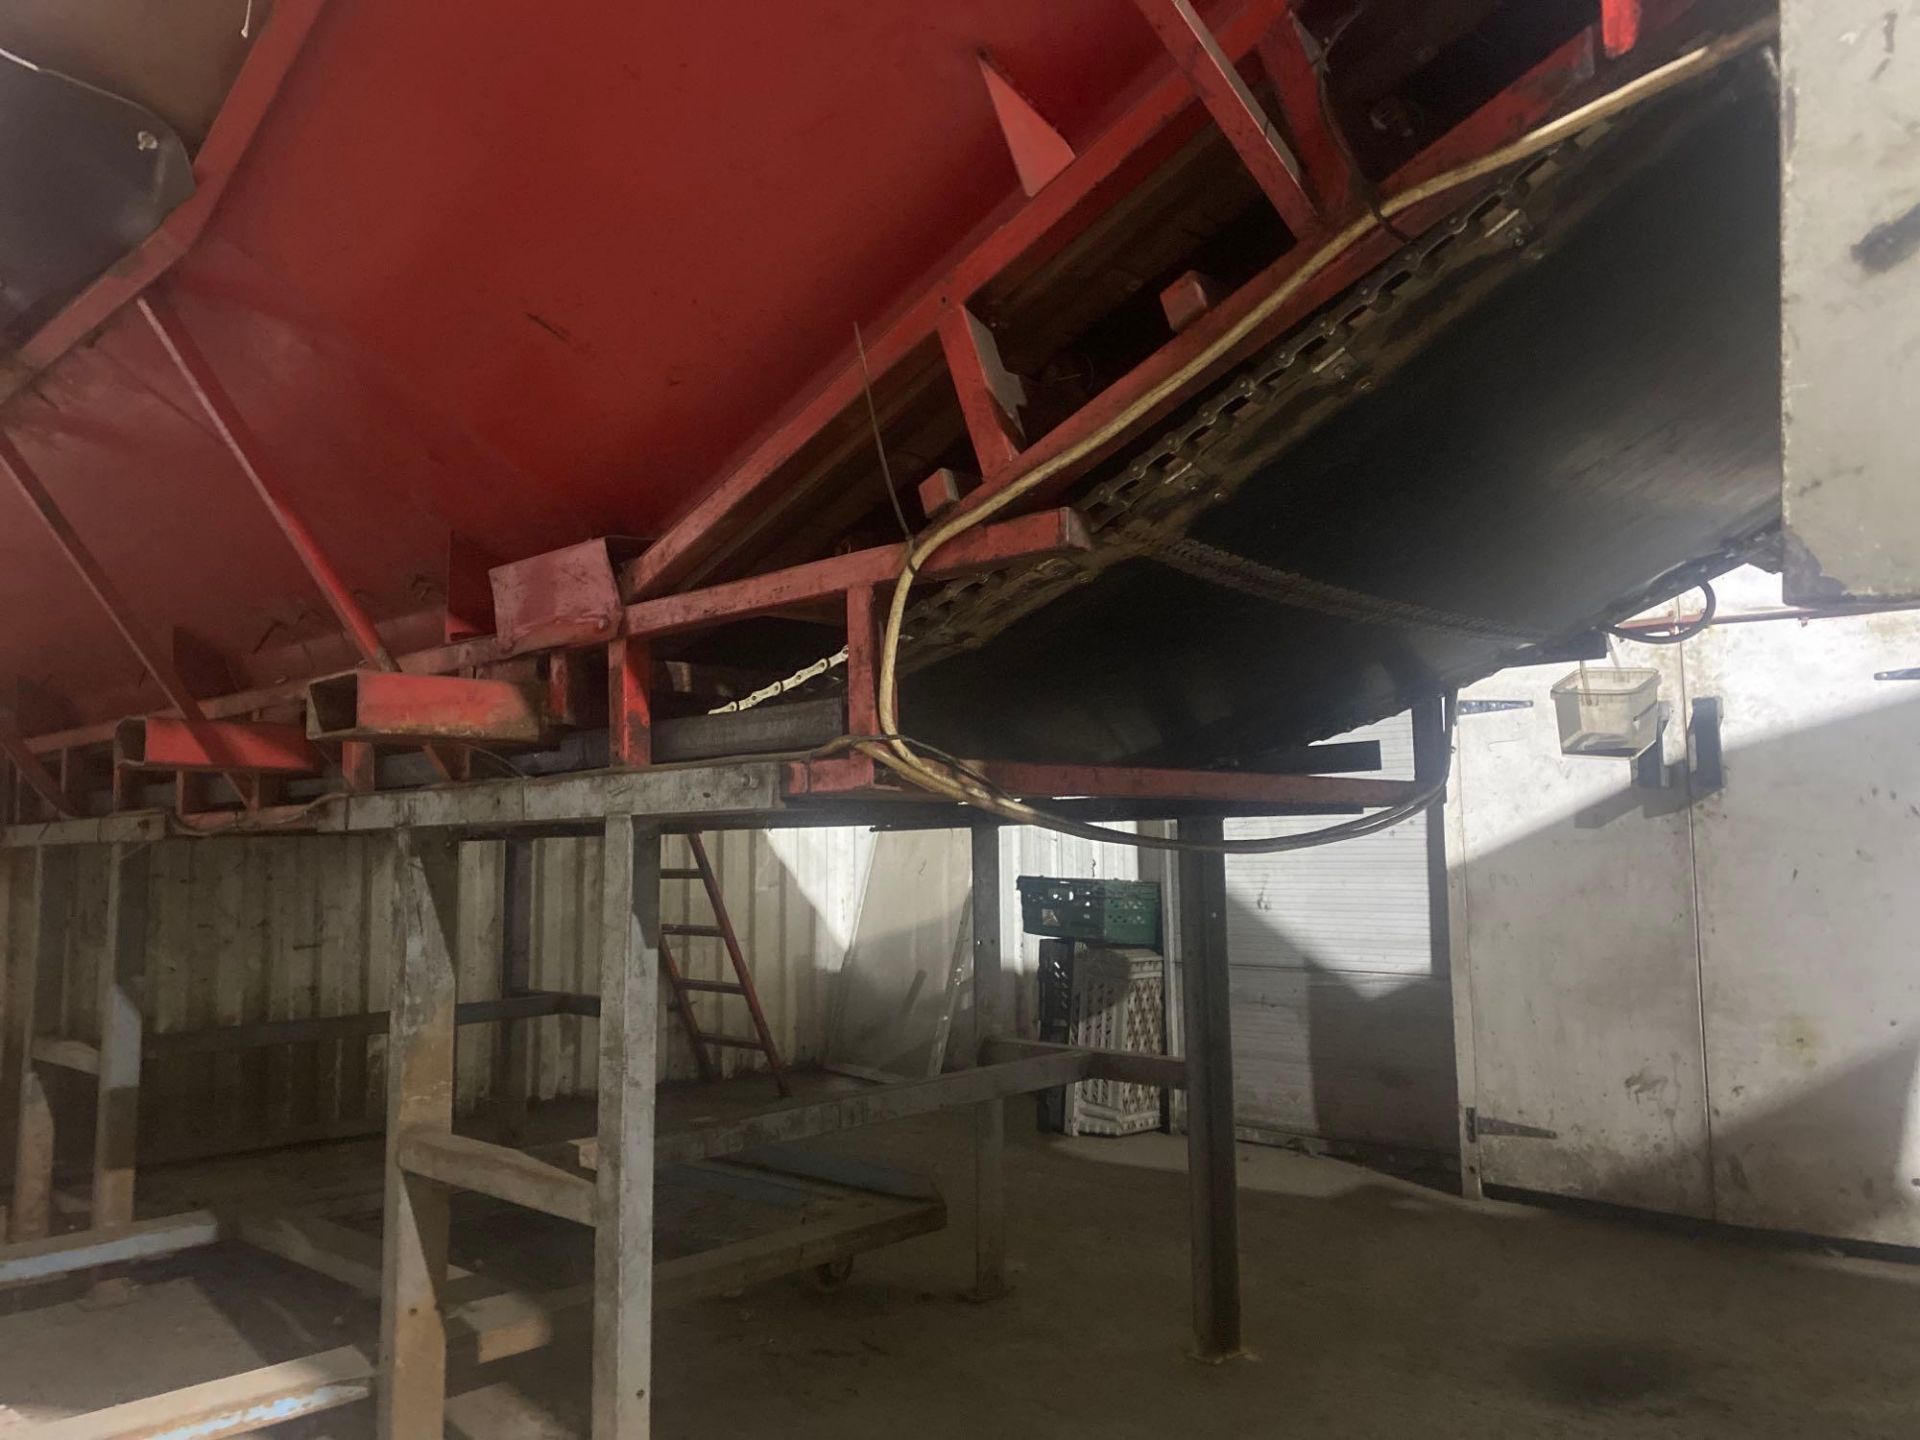 Downs box tipper and boat infeed conveyor - Image 5 of 6